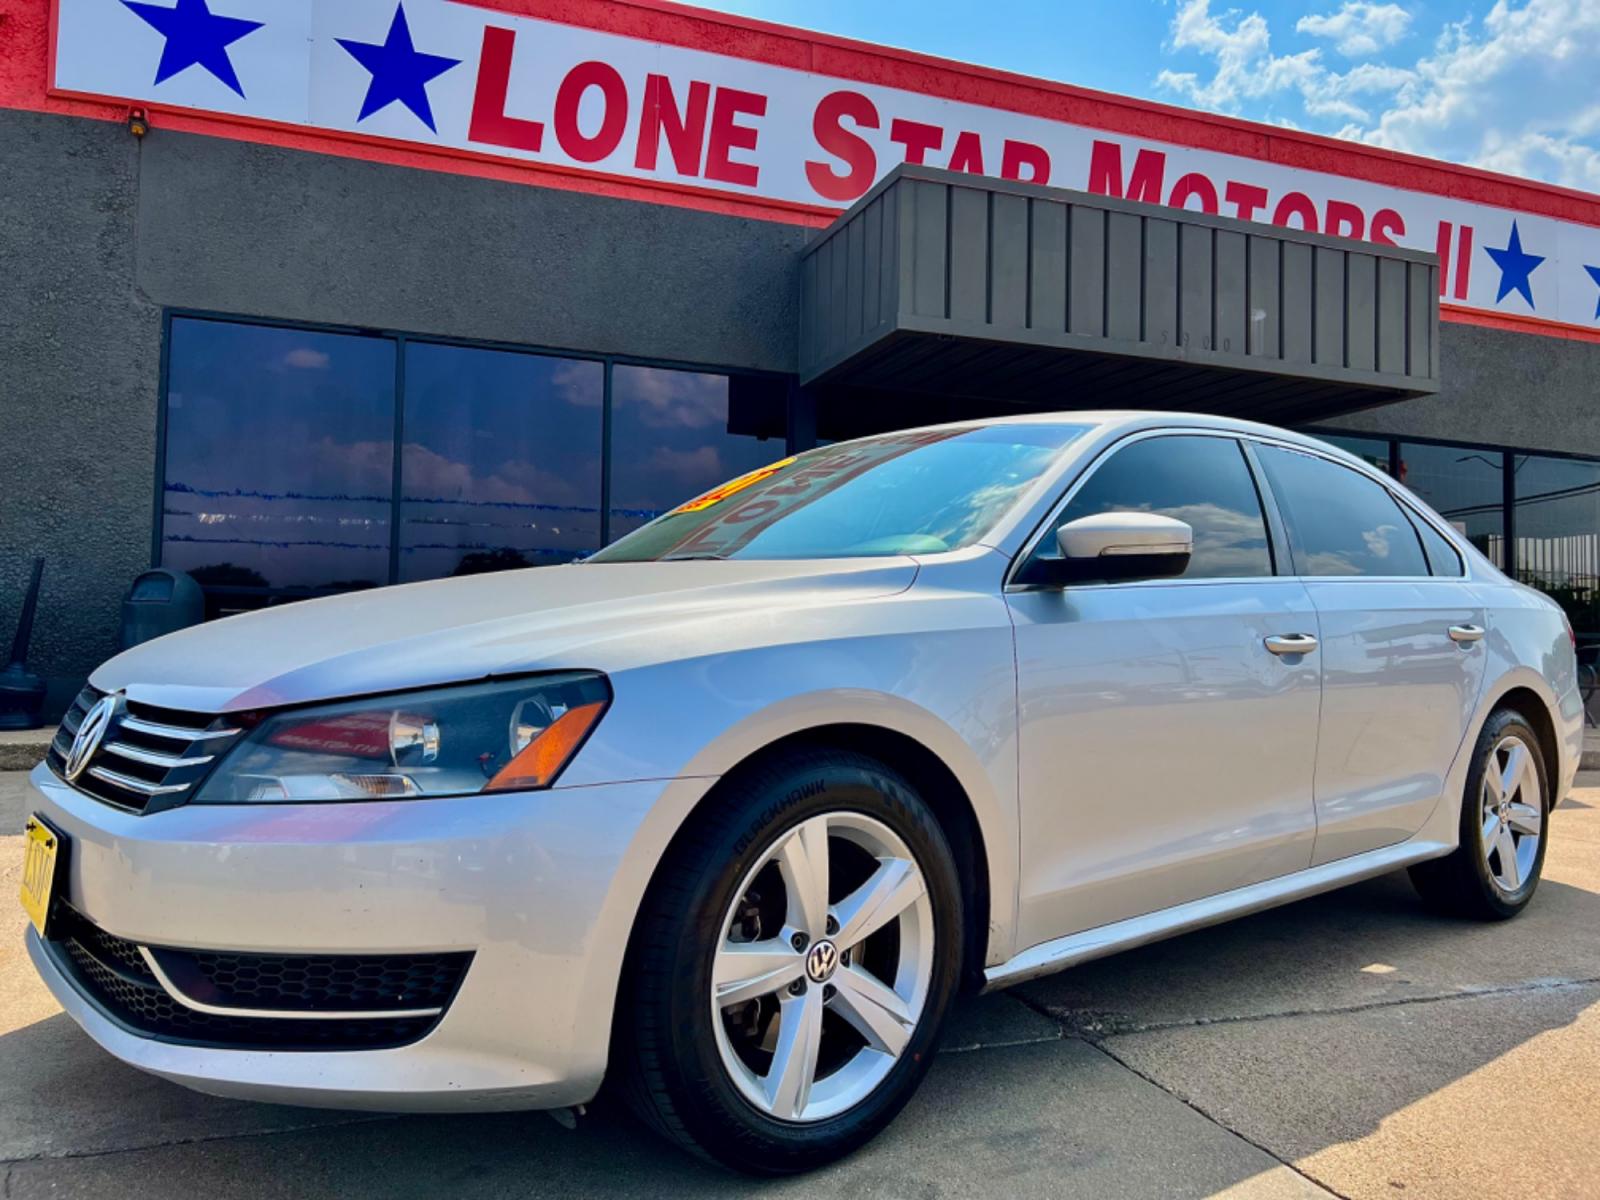 2013 SILVER /Black VOLKSWAGEN PASSAT (1VWBP7A32DC) , located at 5900 E. Lancaster Ave., Fort Worth, TX, 76112, (817) 457-5456, 0.000000, 0.000000 - CASH CAR ONLY, NO FINANCING AVAILABLE. THIS 2013 VOLKSWAGEN PASSAT 4 DOOR SEDAN RUNS AND DRIVES GREAT. IT IS EQUIPPED WITH A CD PLAYER, AM/FM RADIO AND AN AUX PORT. THE TIRES ARE IN GOOD CONDITION AND STILL HAVE TREAD LEFT ON THEM. THIS CAR WILL NOT LAST SO ACT FAST! Call or text Frances at 68 - Photo #1